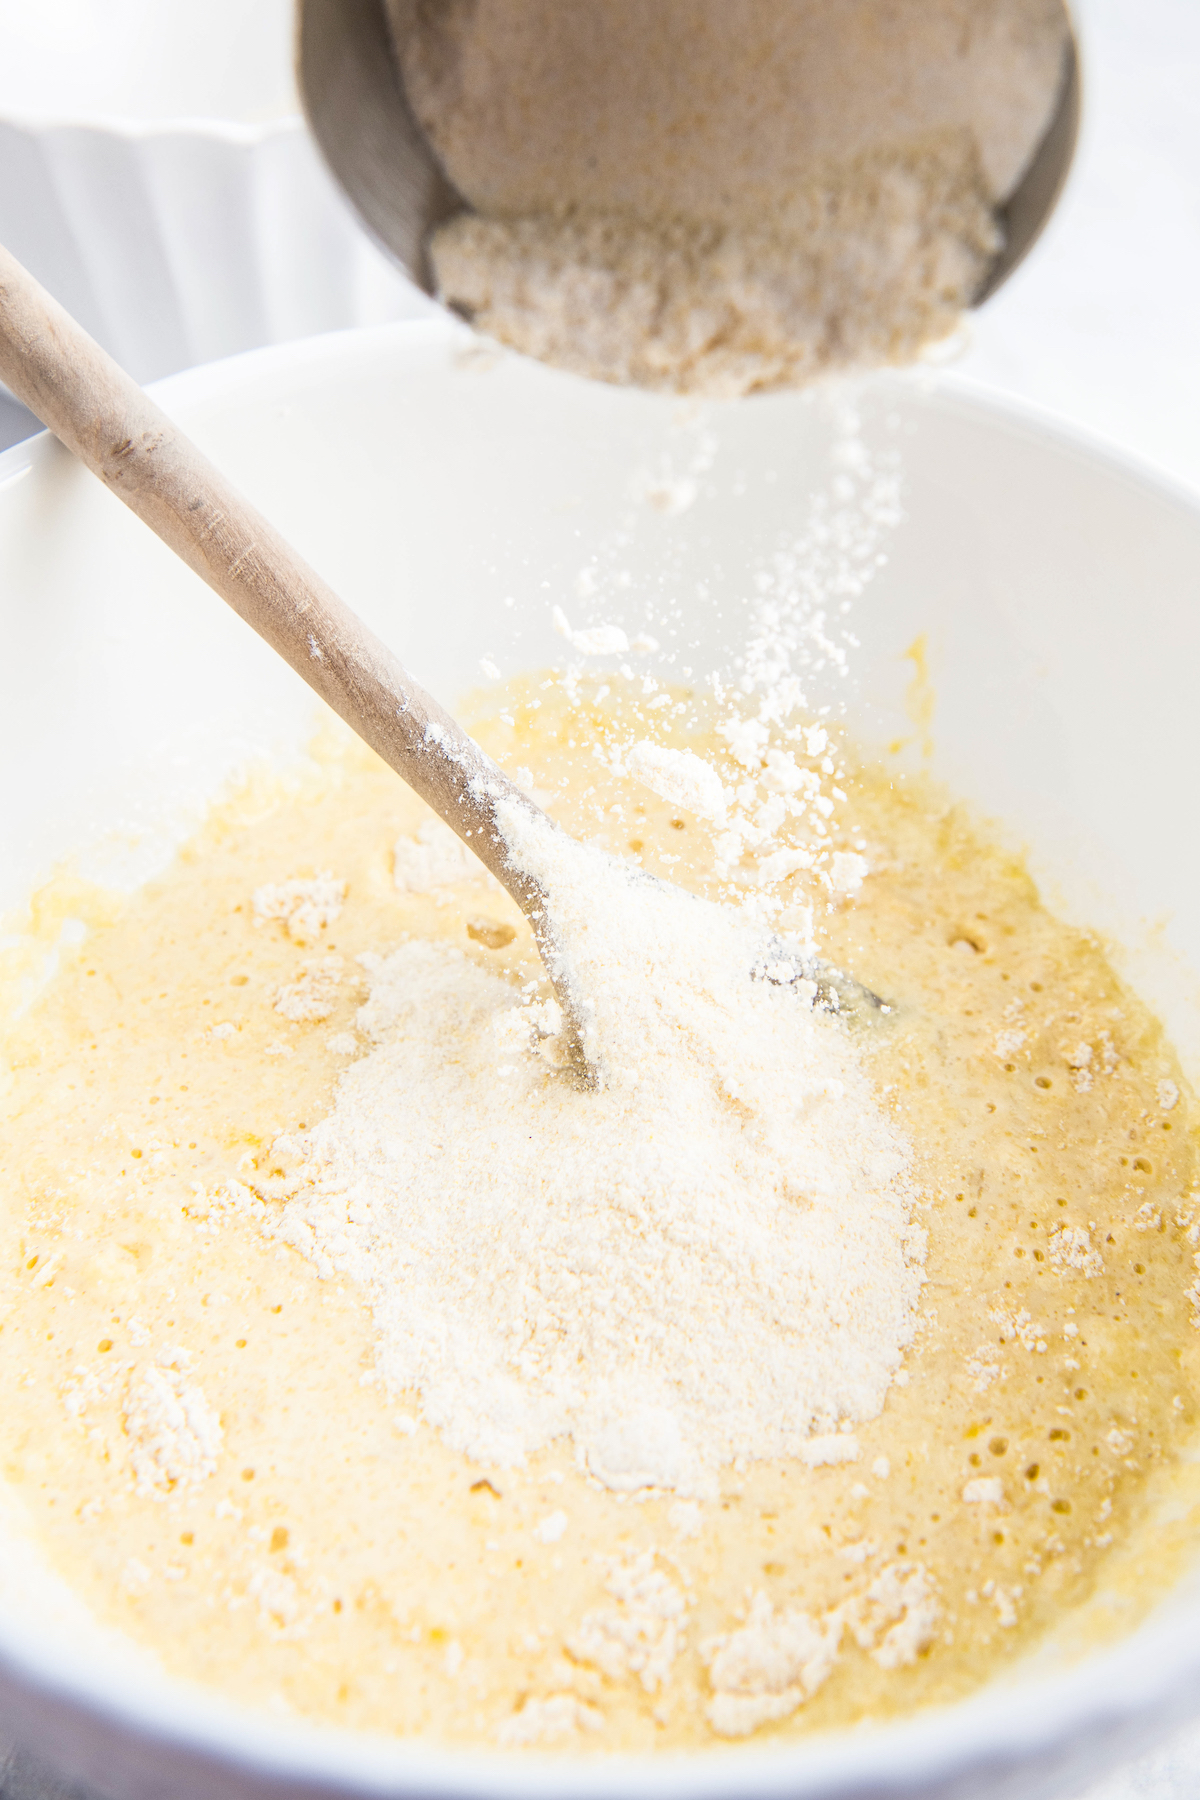 Adding dry ingredients to wet ingredients in a large white mixing bowl.